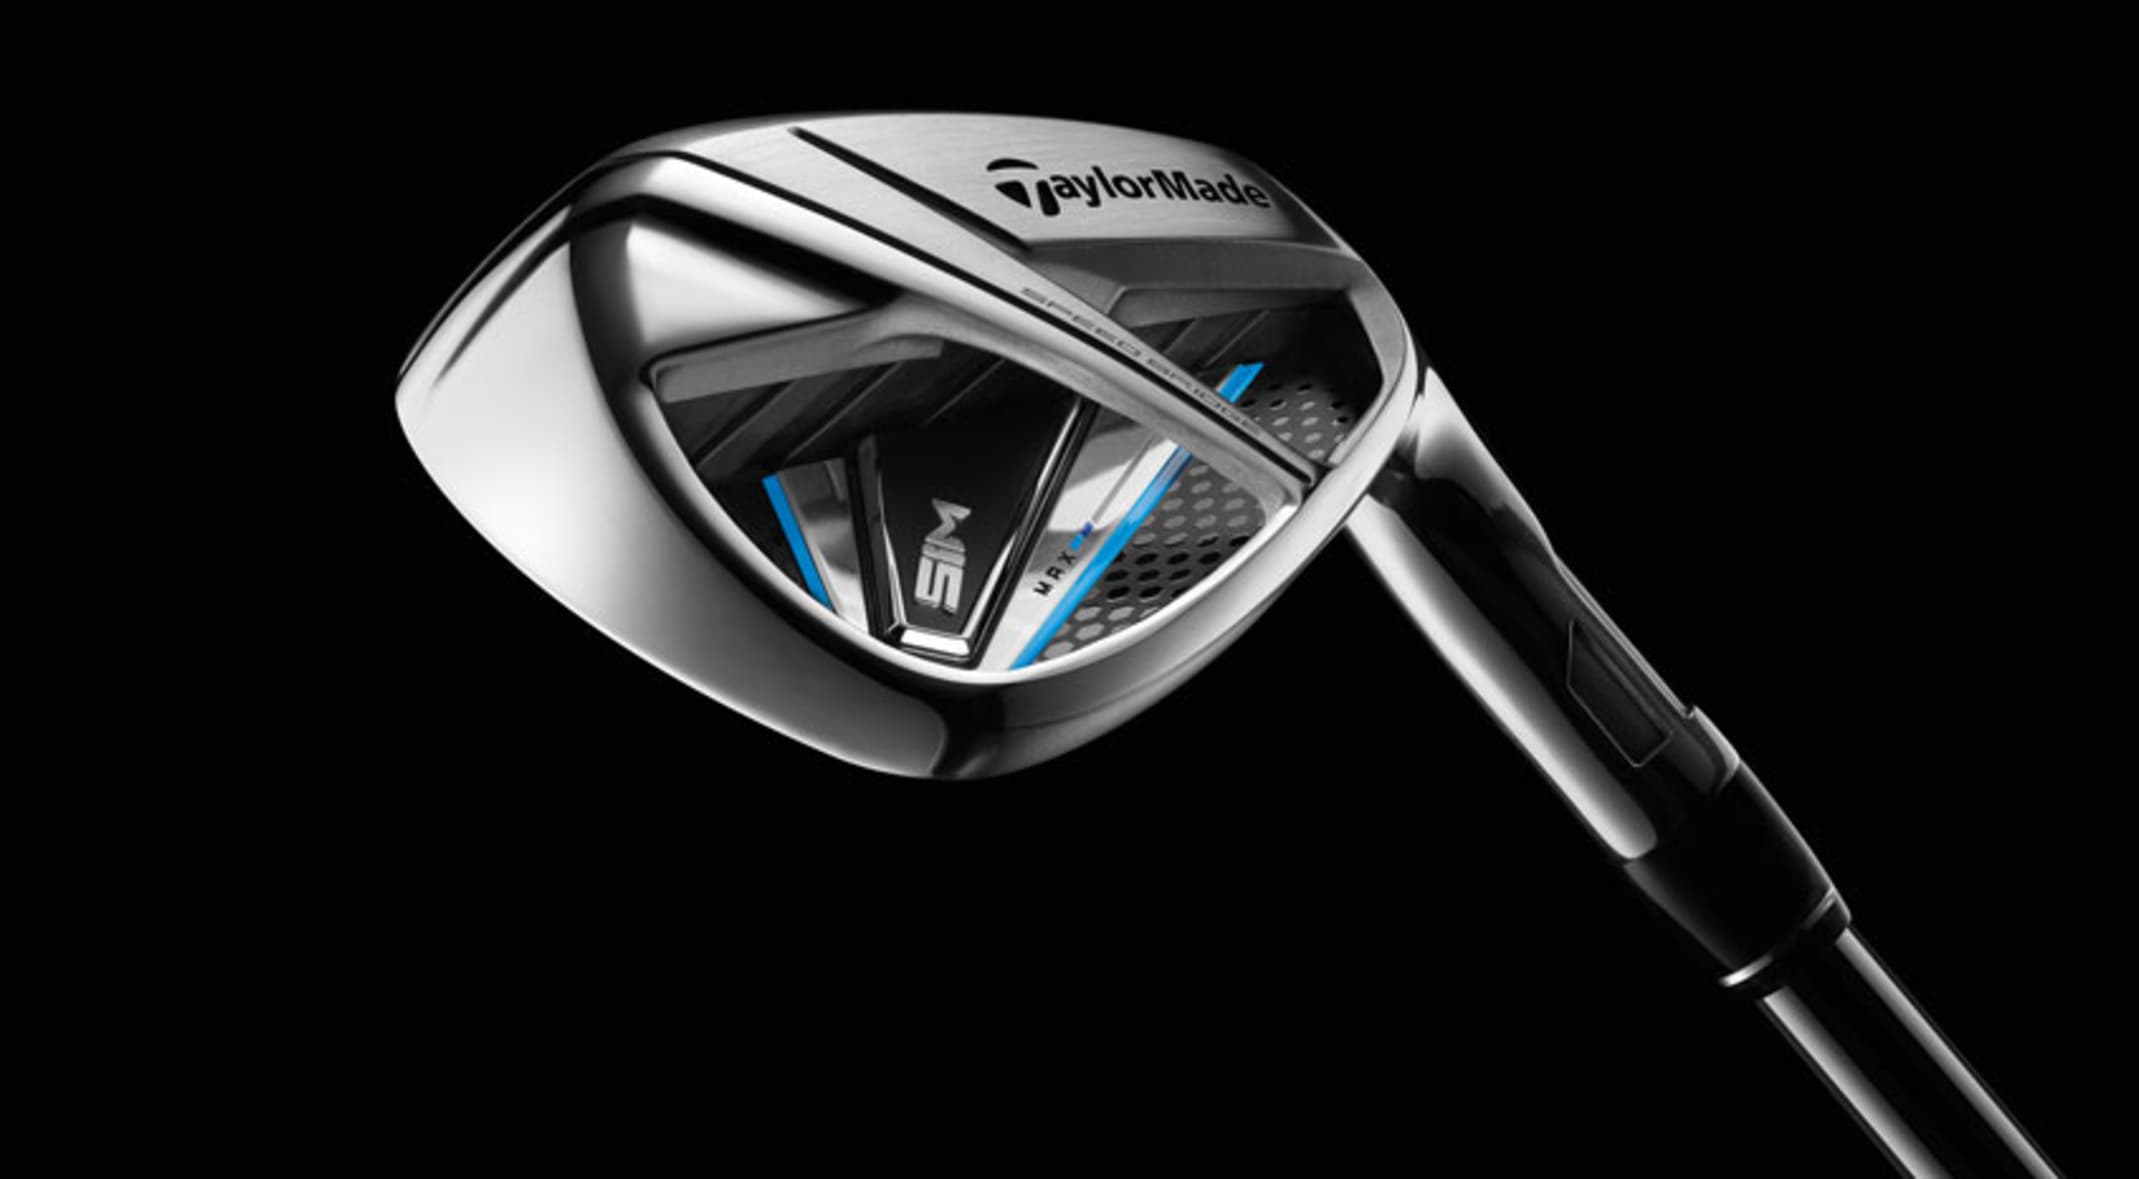 Nick Taylor Adds New Taylormade Sim Max 4 Iron At Sony Open In Hawaii